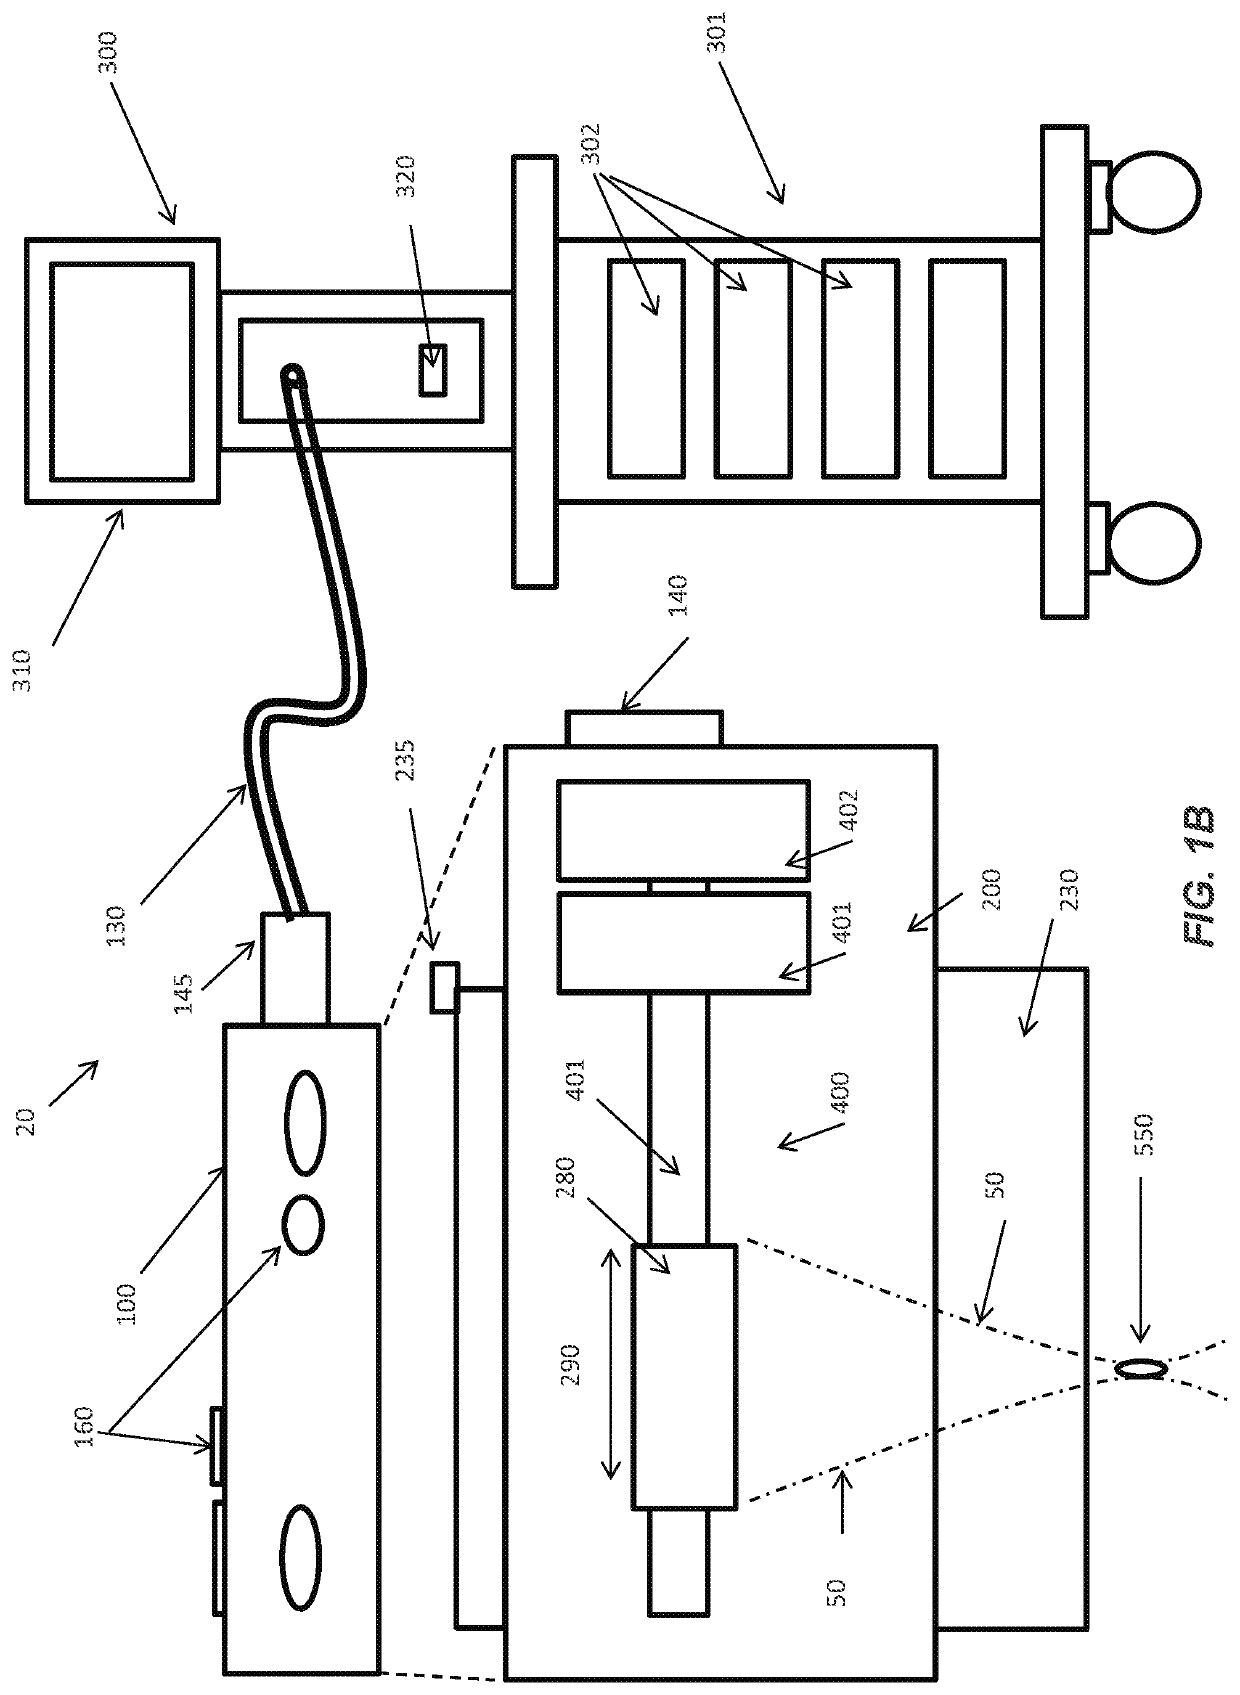 Systems and methods for simultaneous multi-focus ultrasound therapy in multiple dimensions